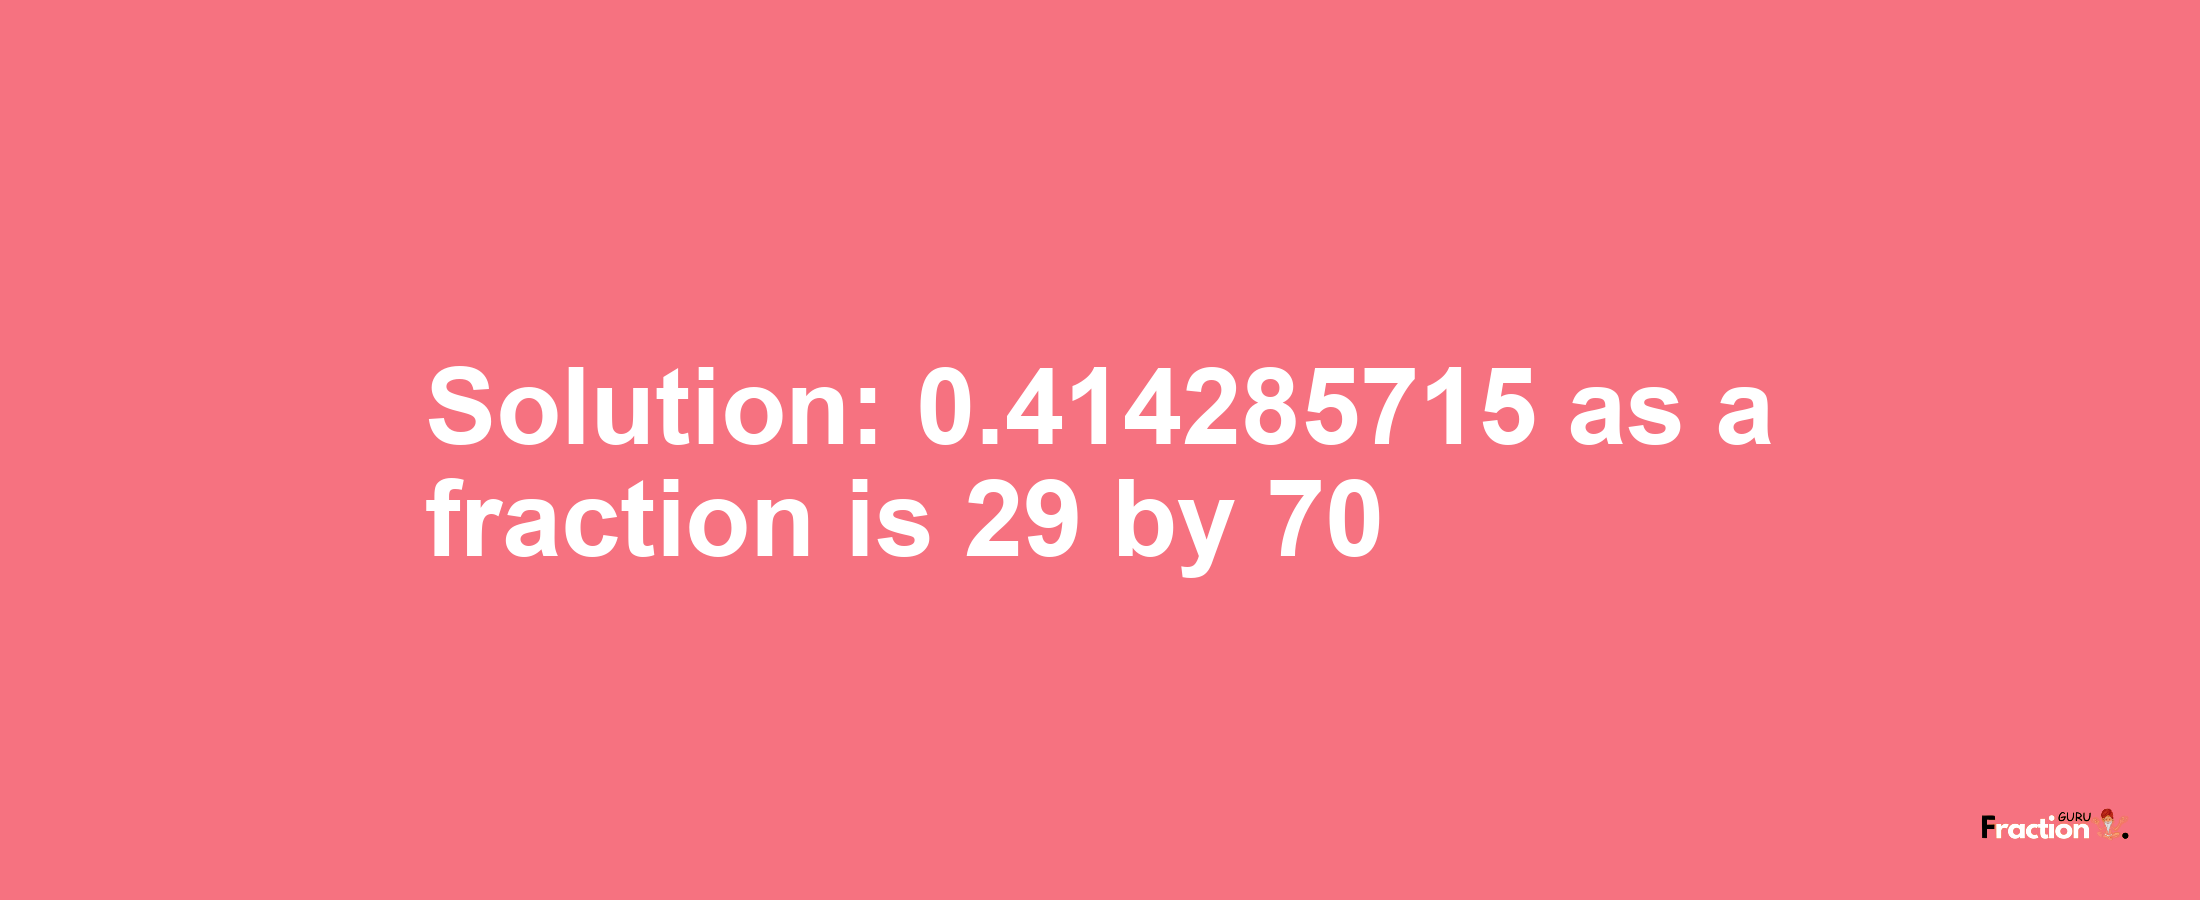 Solution:0.414285715 as a fraction is 29/70